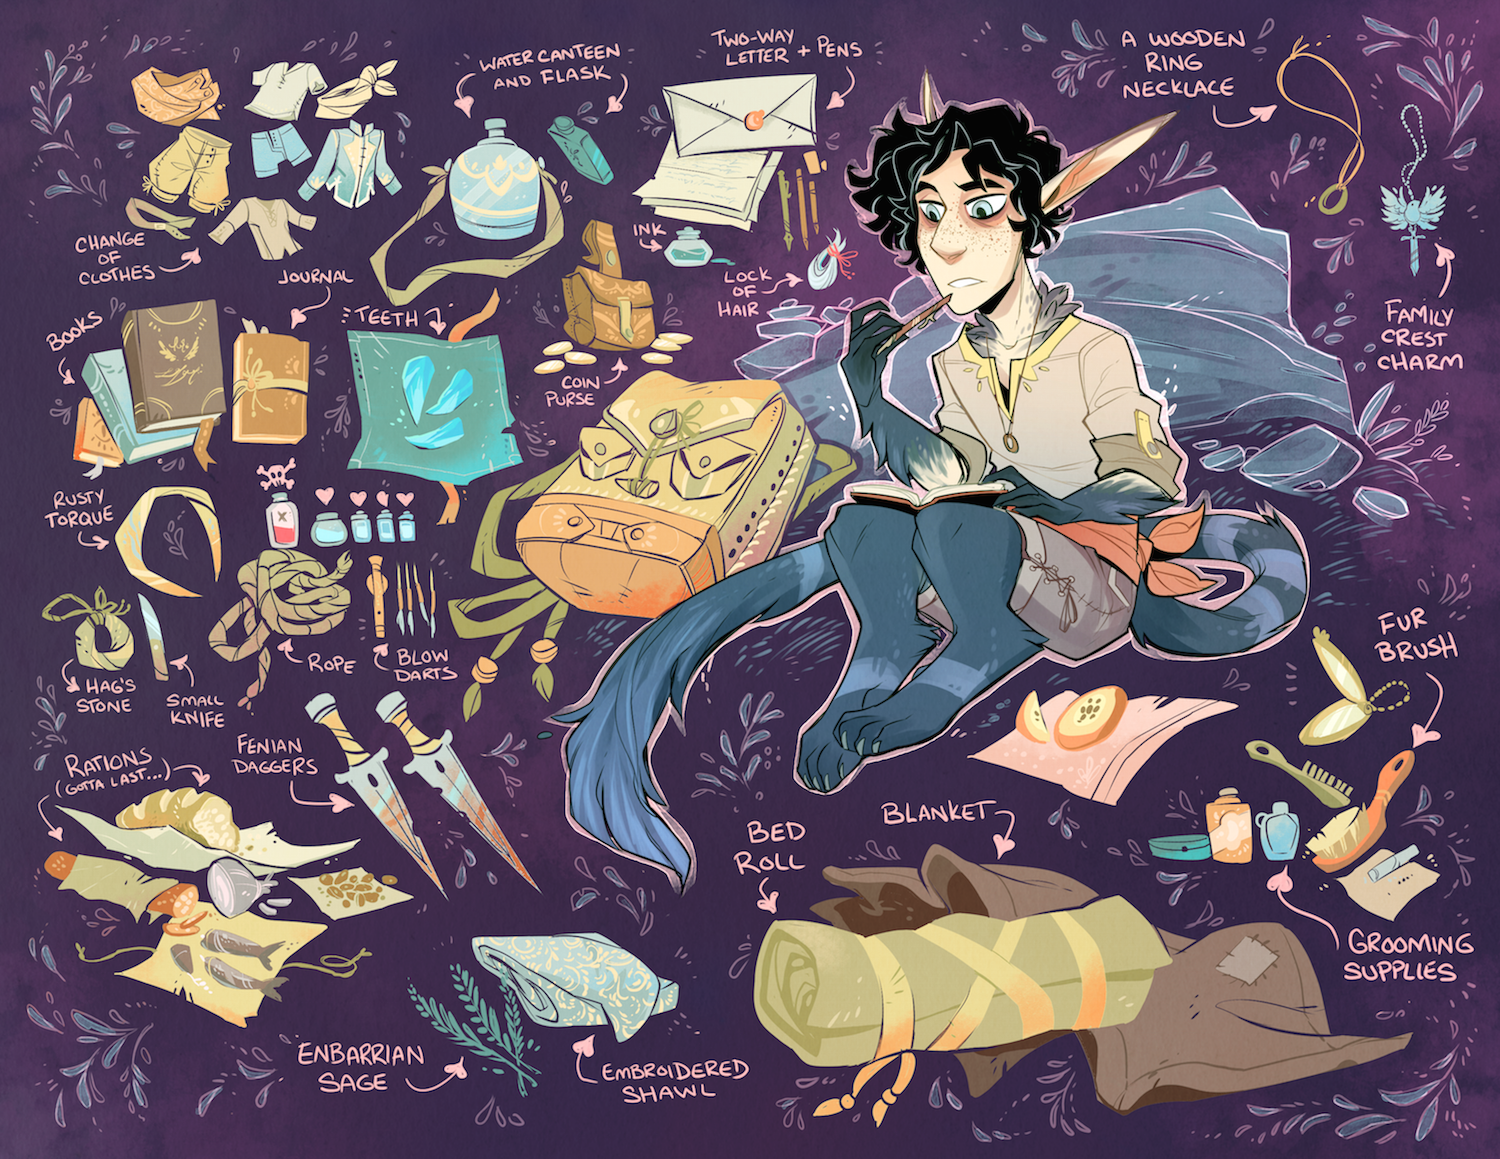 DnD - Whats In Vals Bag on Fenian.png